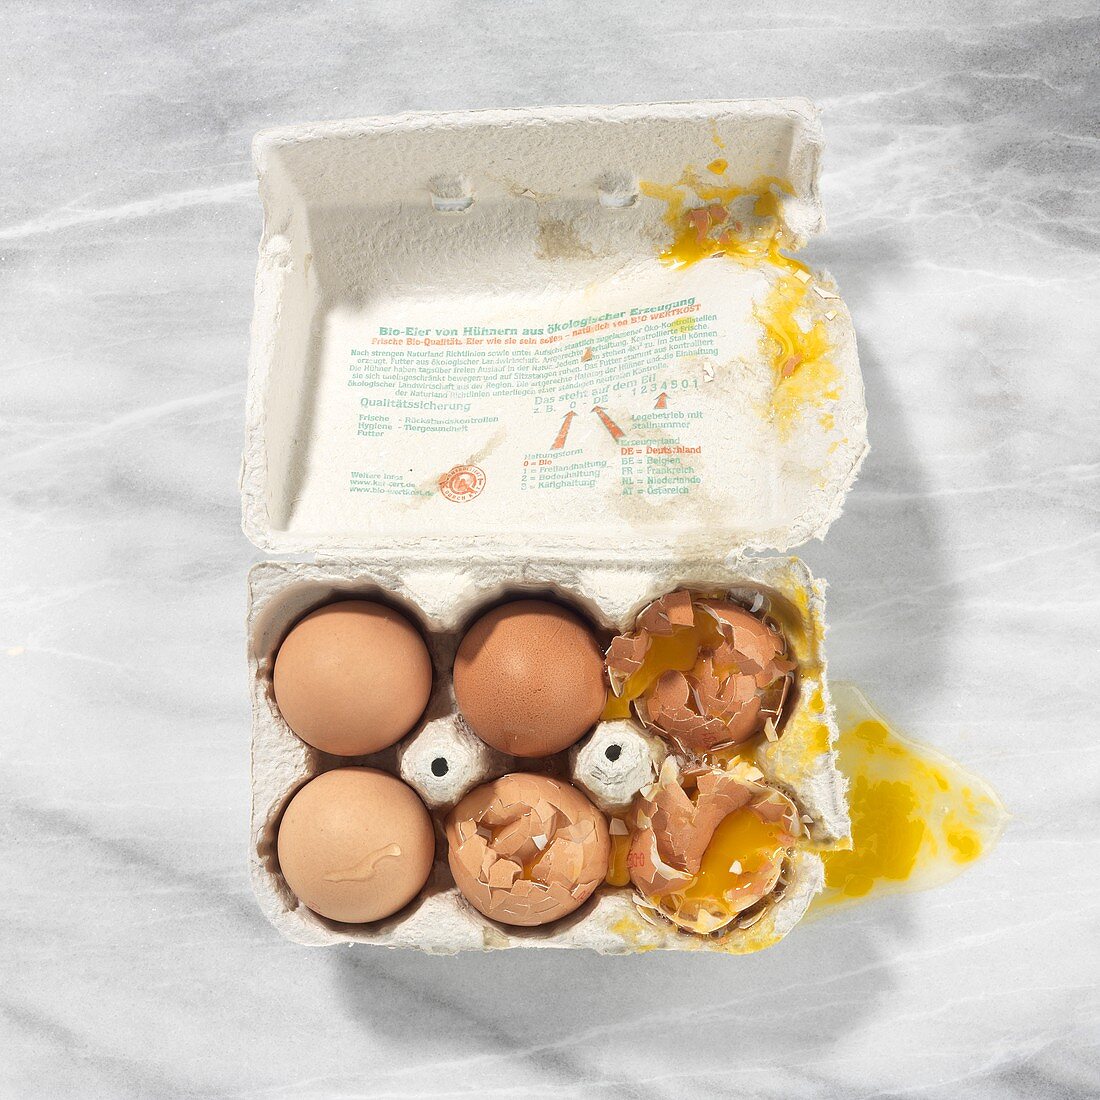 Three whole and three broken eggs in a box